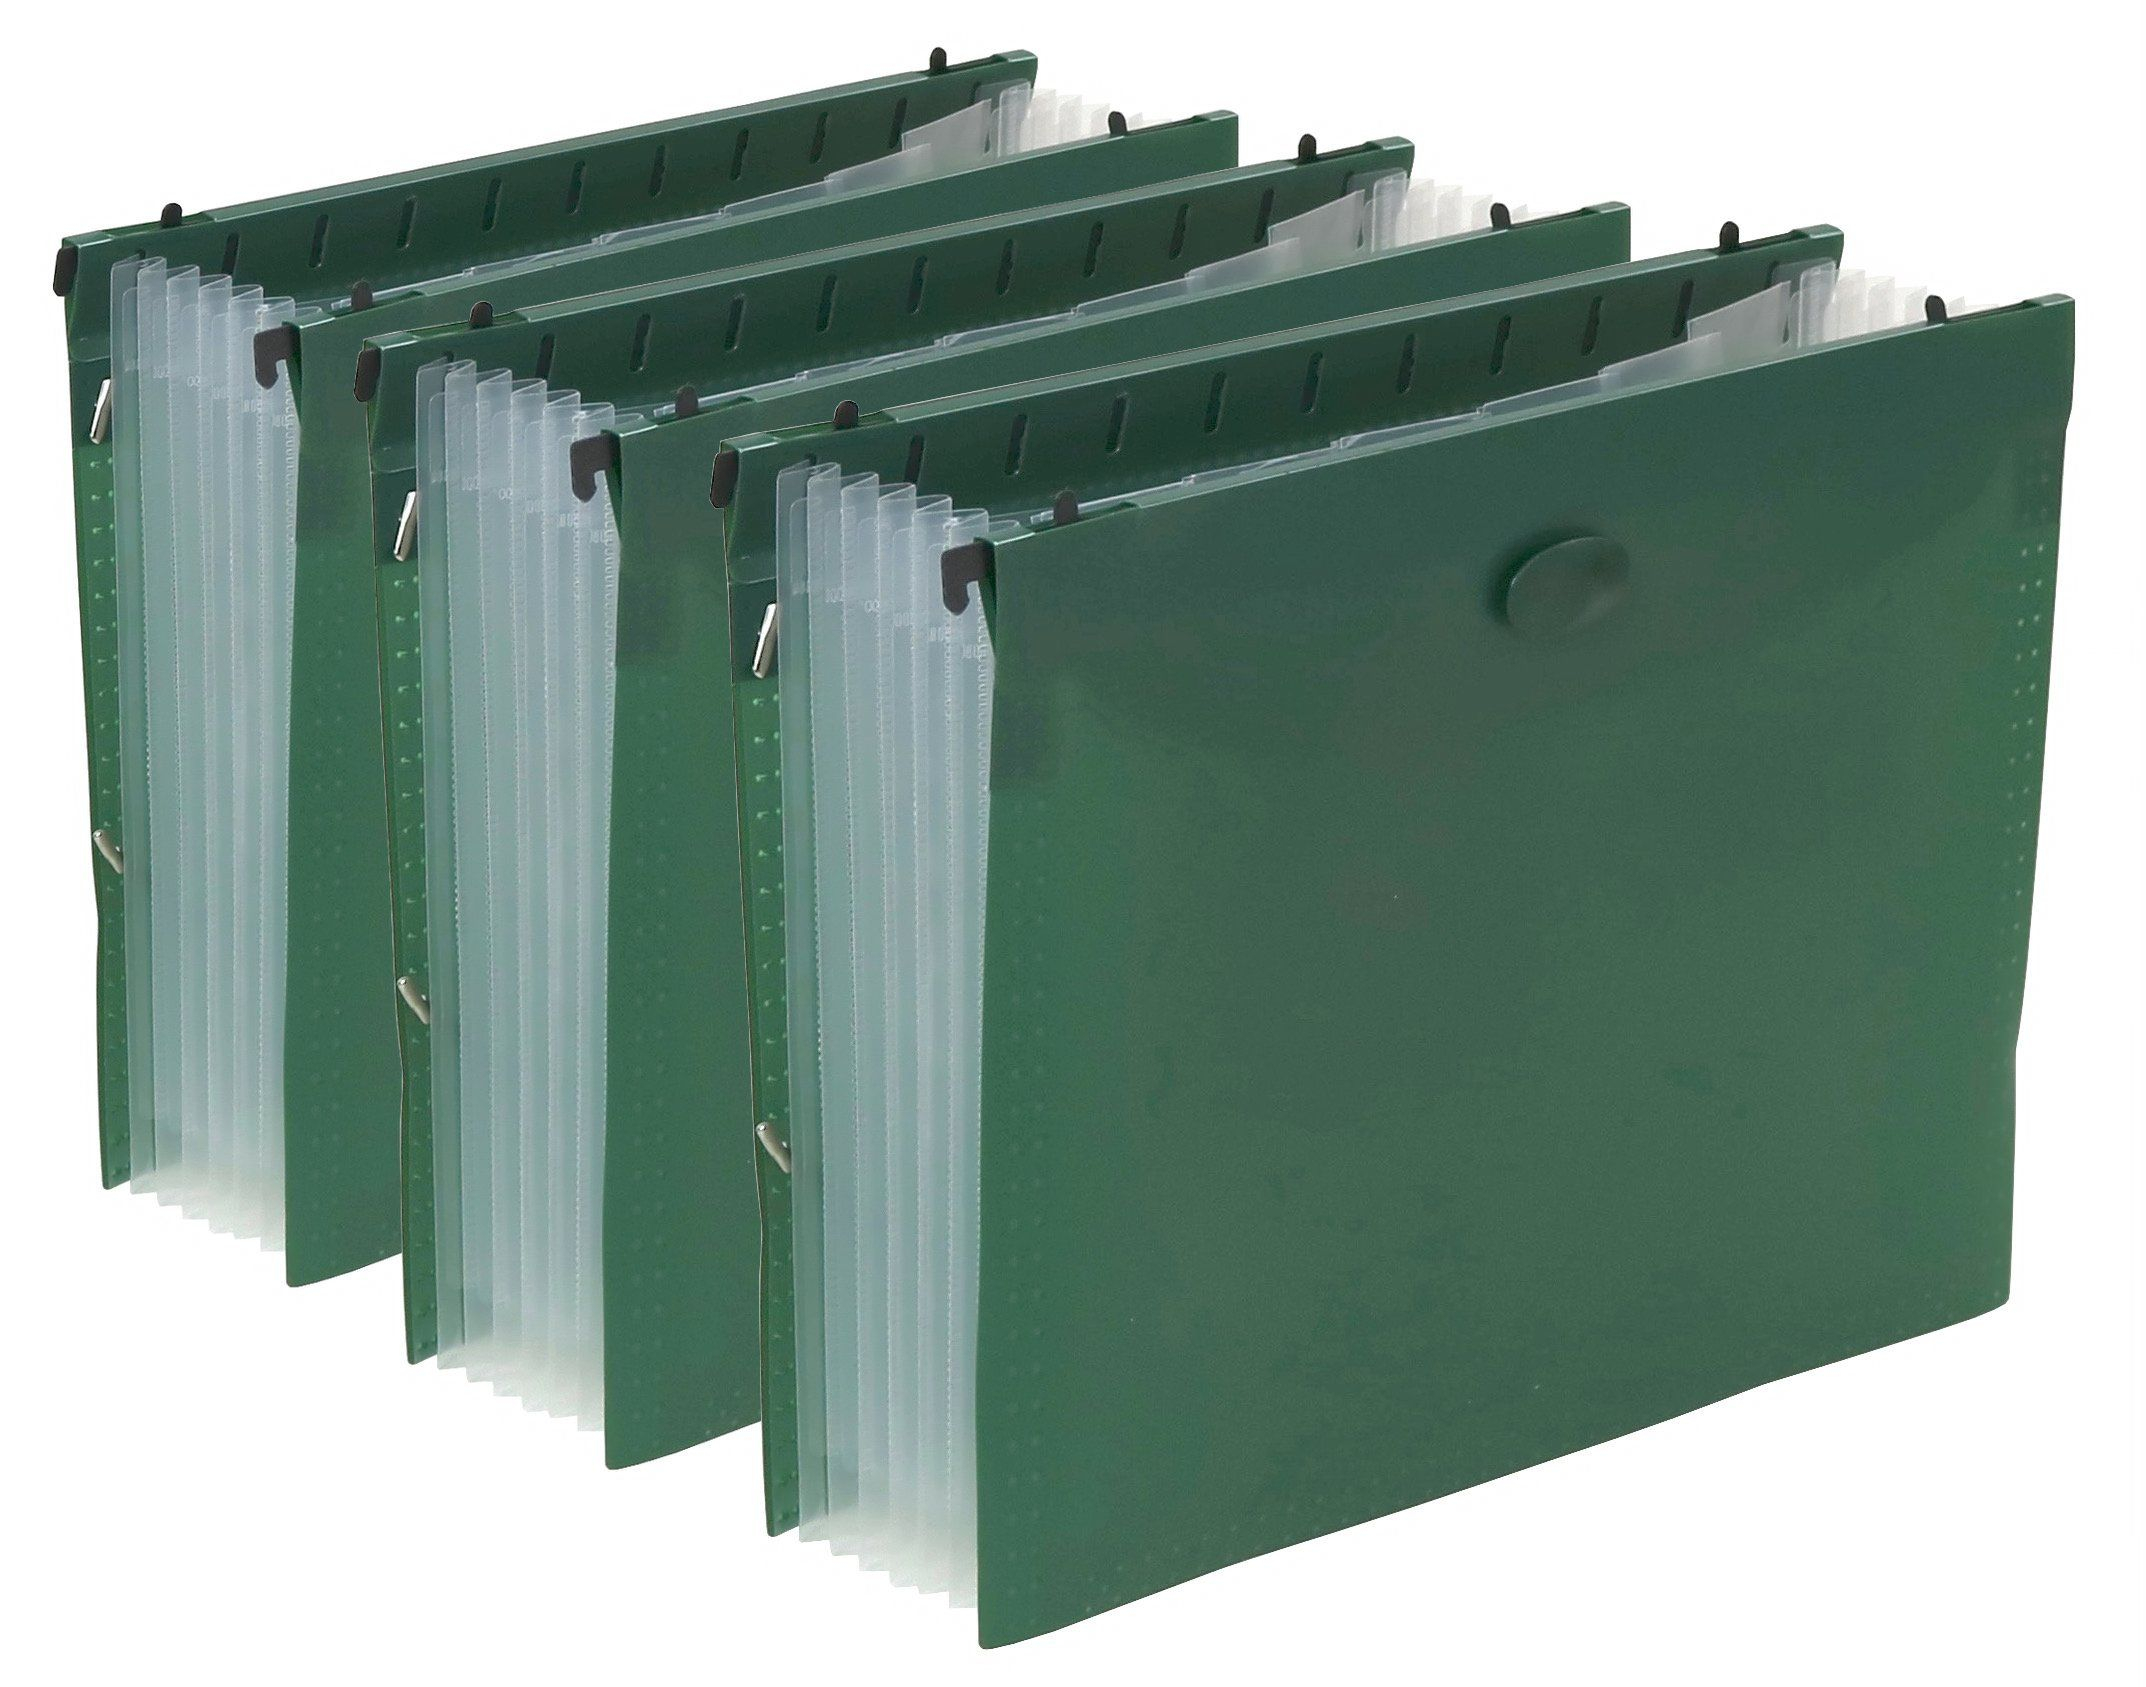 Expanding File Cabinet Hanging File Folder With 7 Divider Pocket 3 throughout sizing 2146 X 1687